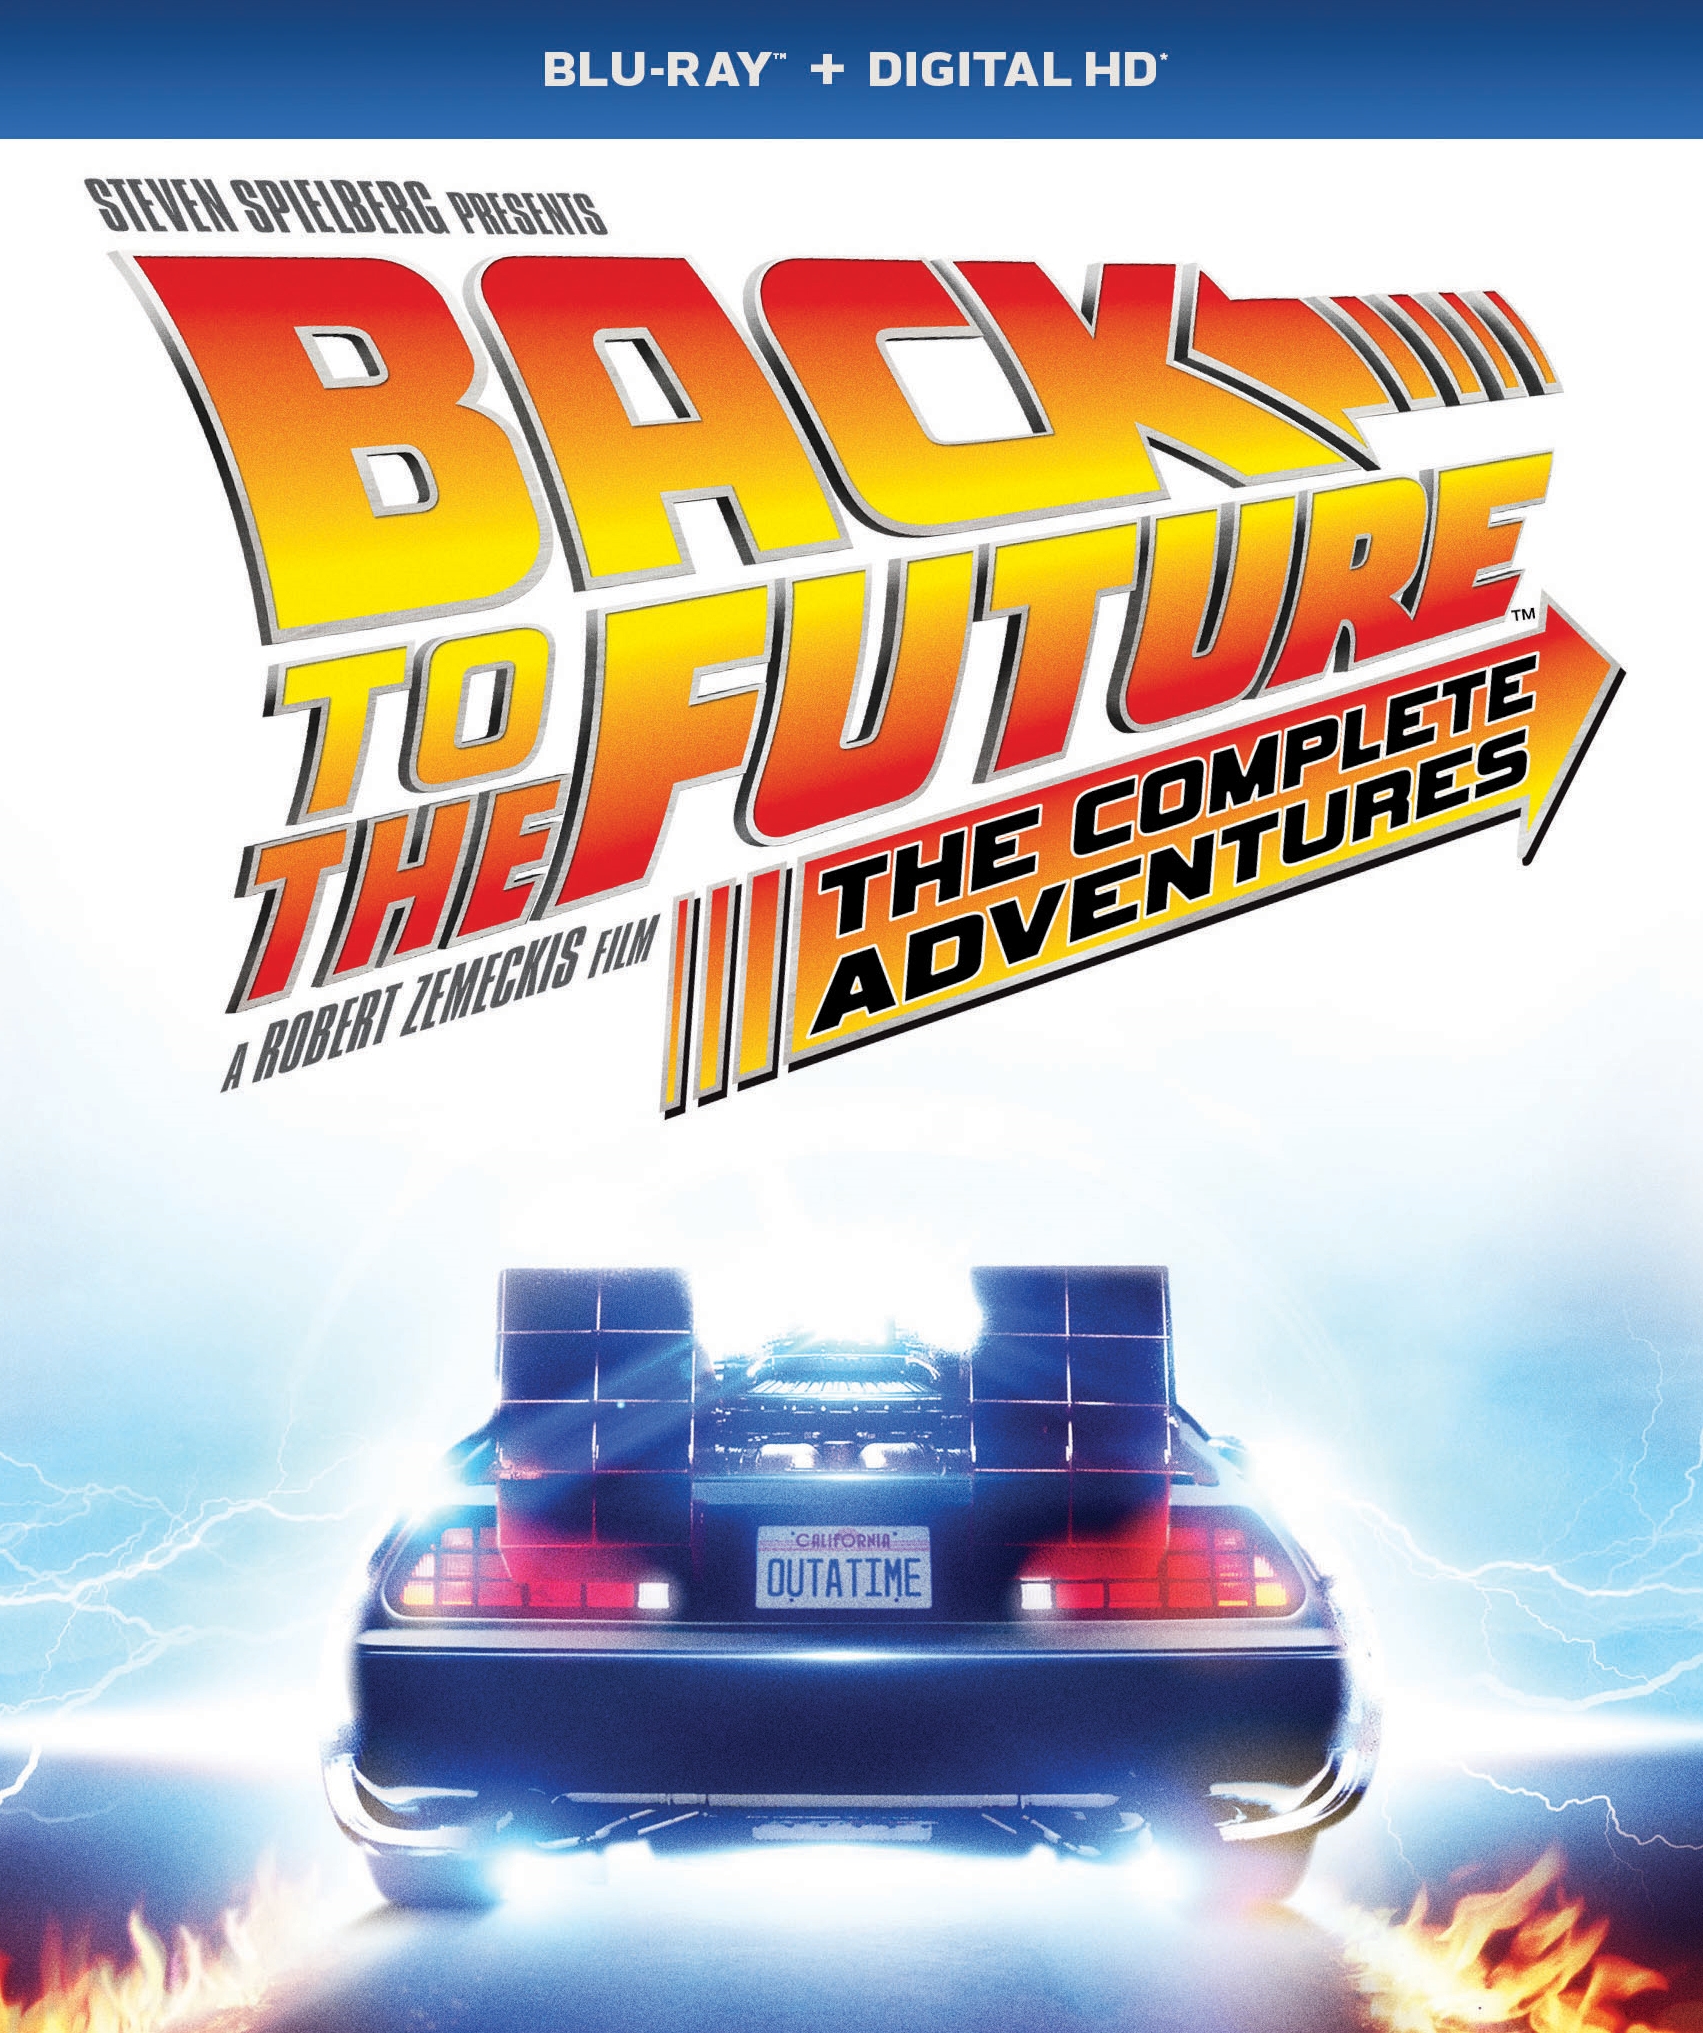 Best Buy: Get Backers, Vol. 10: Get Back the Future [DVD]